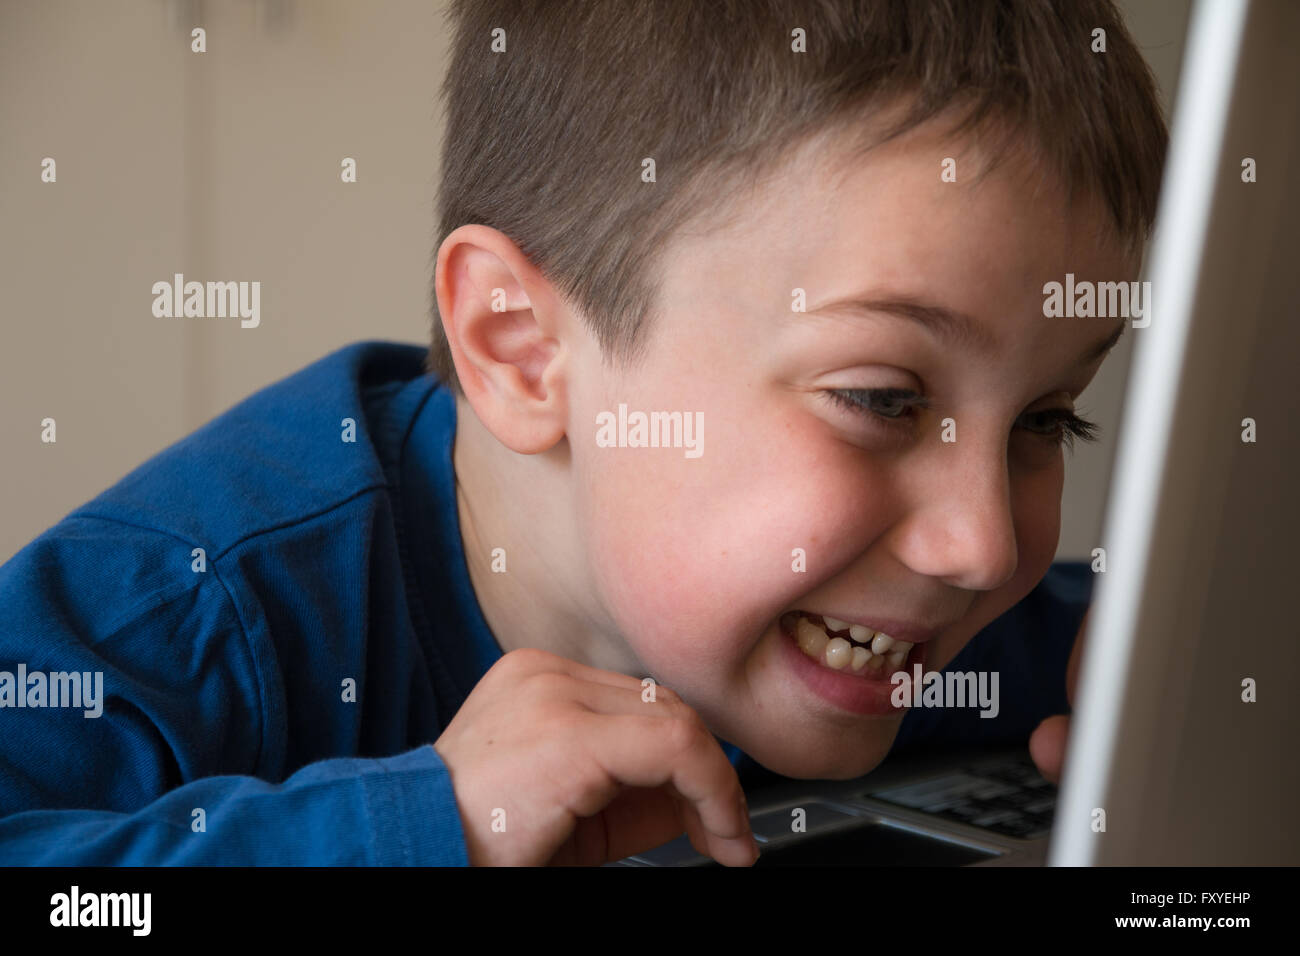 Joking Child in Front of Touch Screen Laptop, tongue stuck out Stock Photo